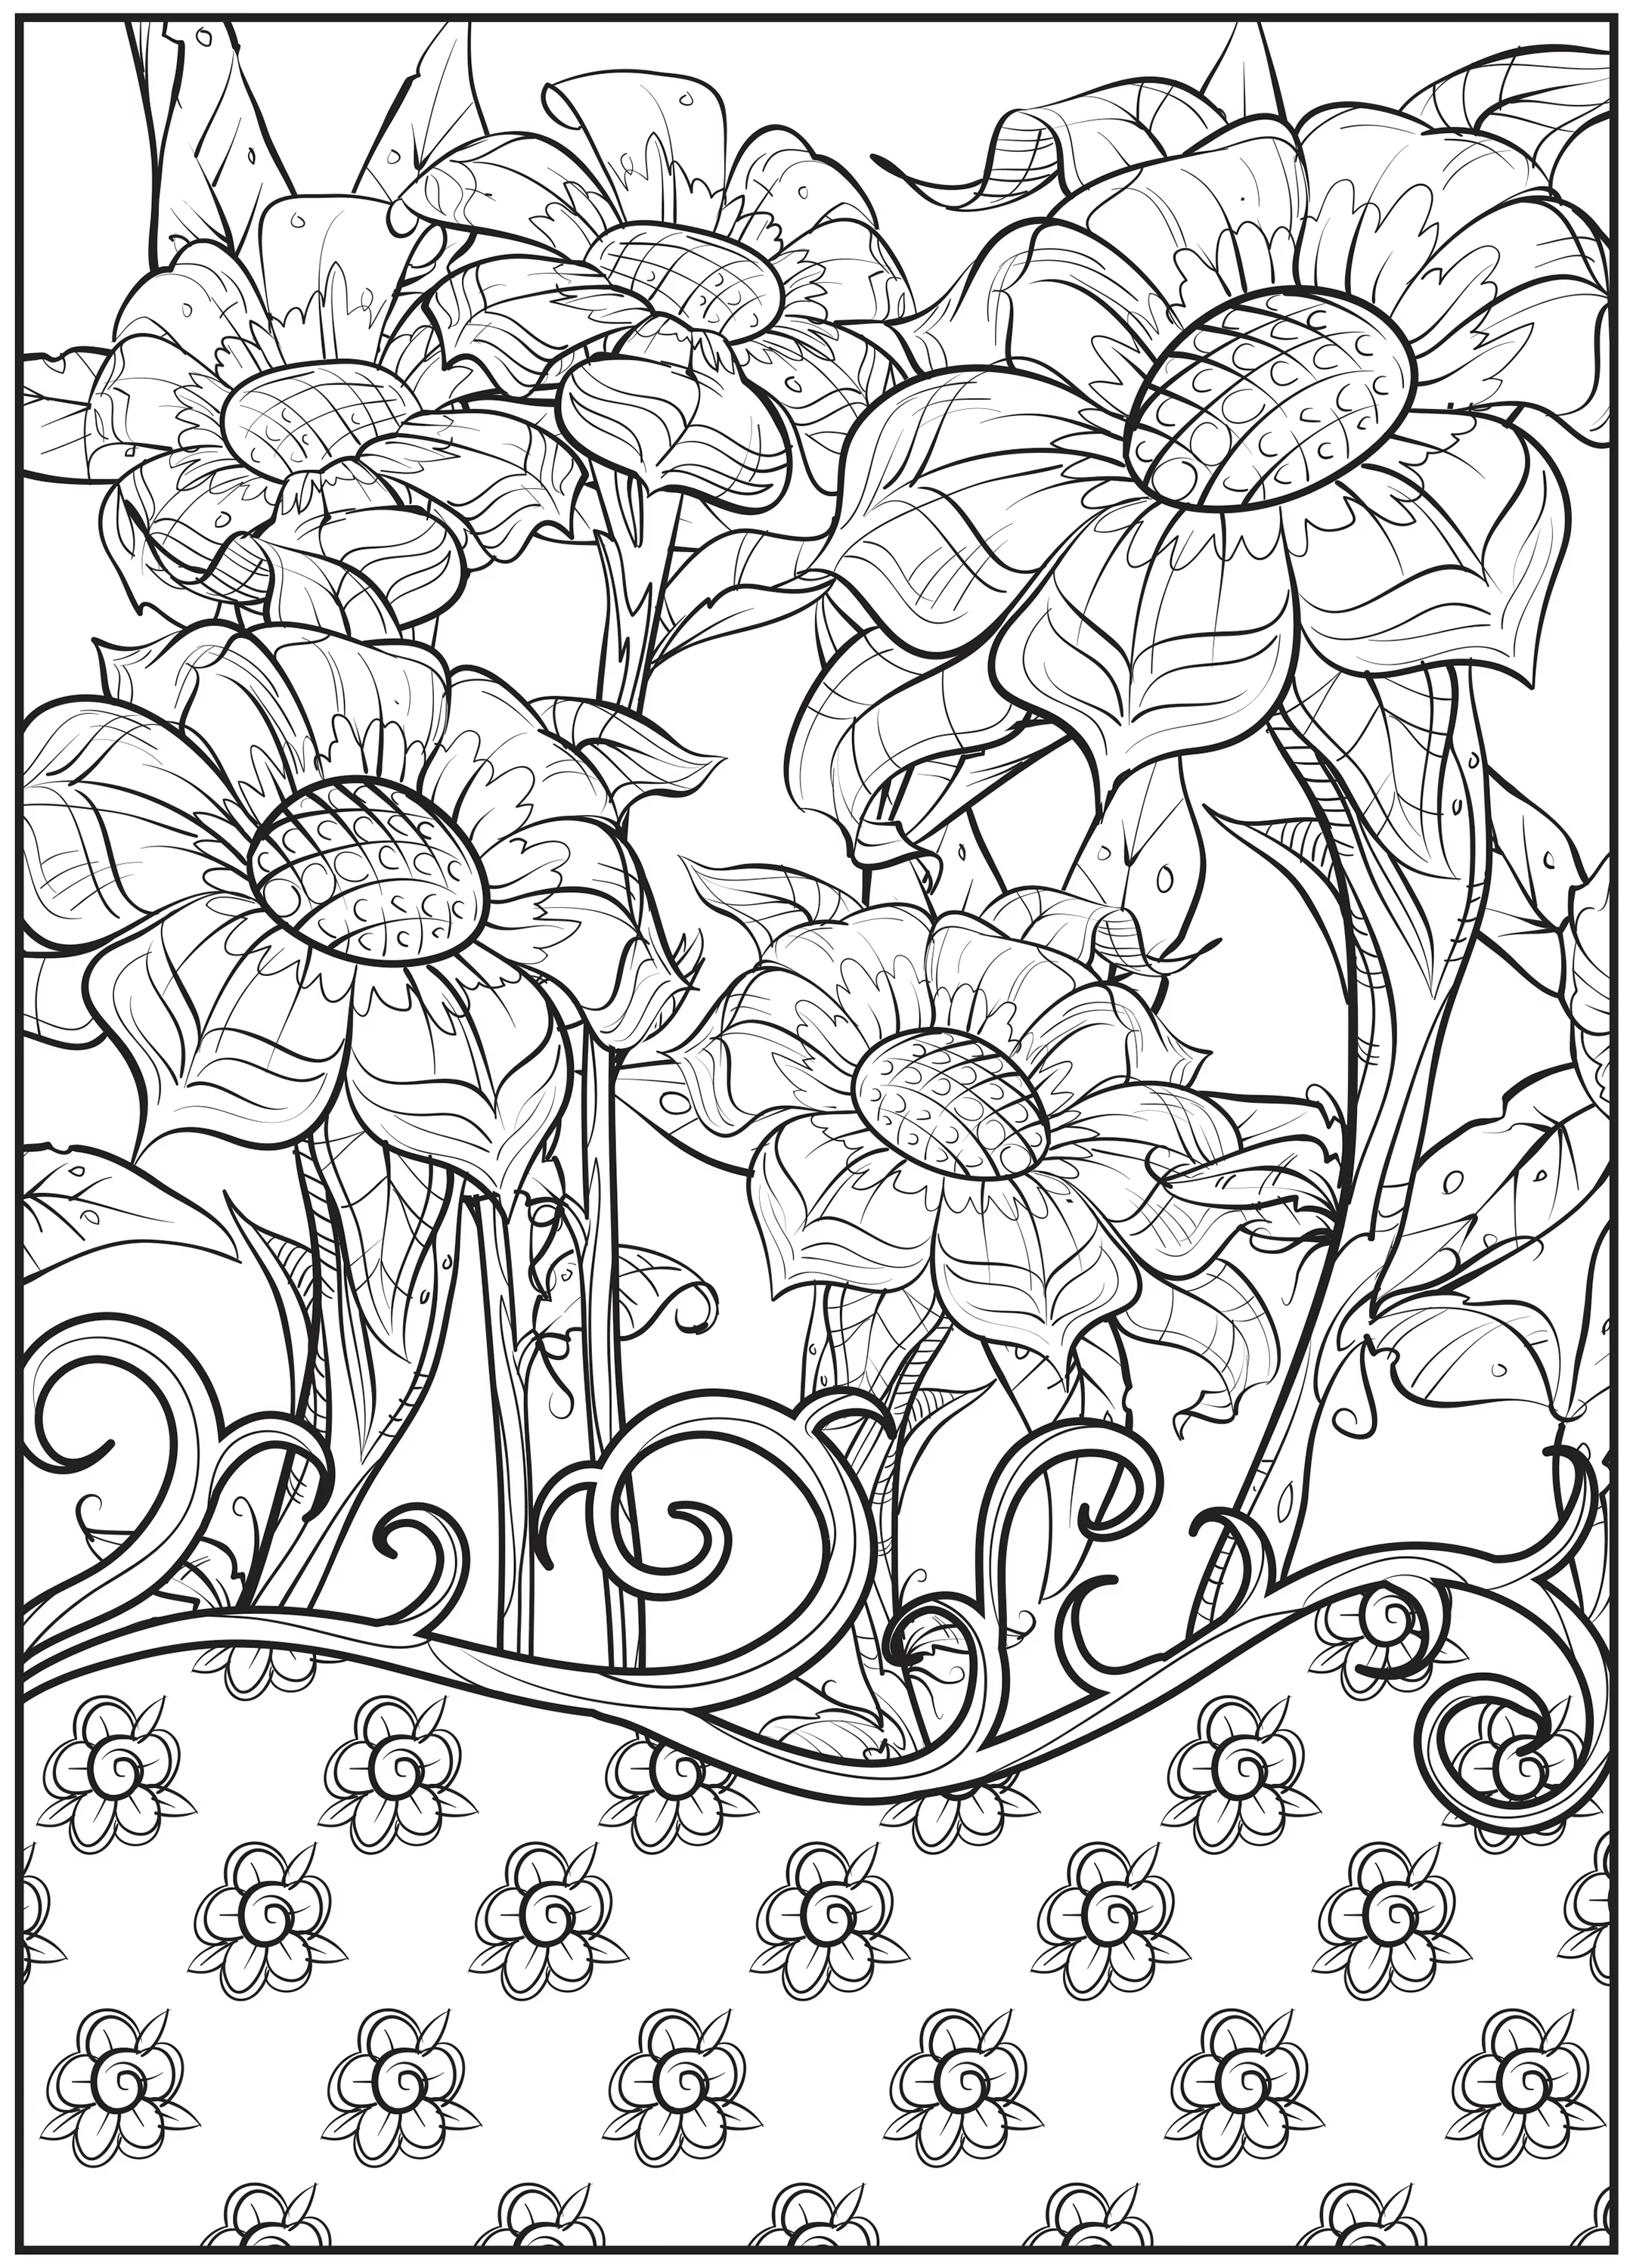 Cra-Z-Art Timeless Creations Adult Coloring Book, Words to Color by, 64  Pages